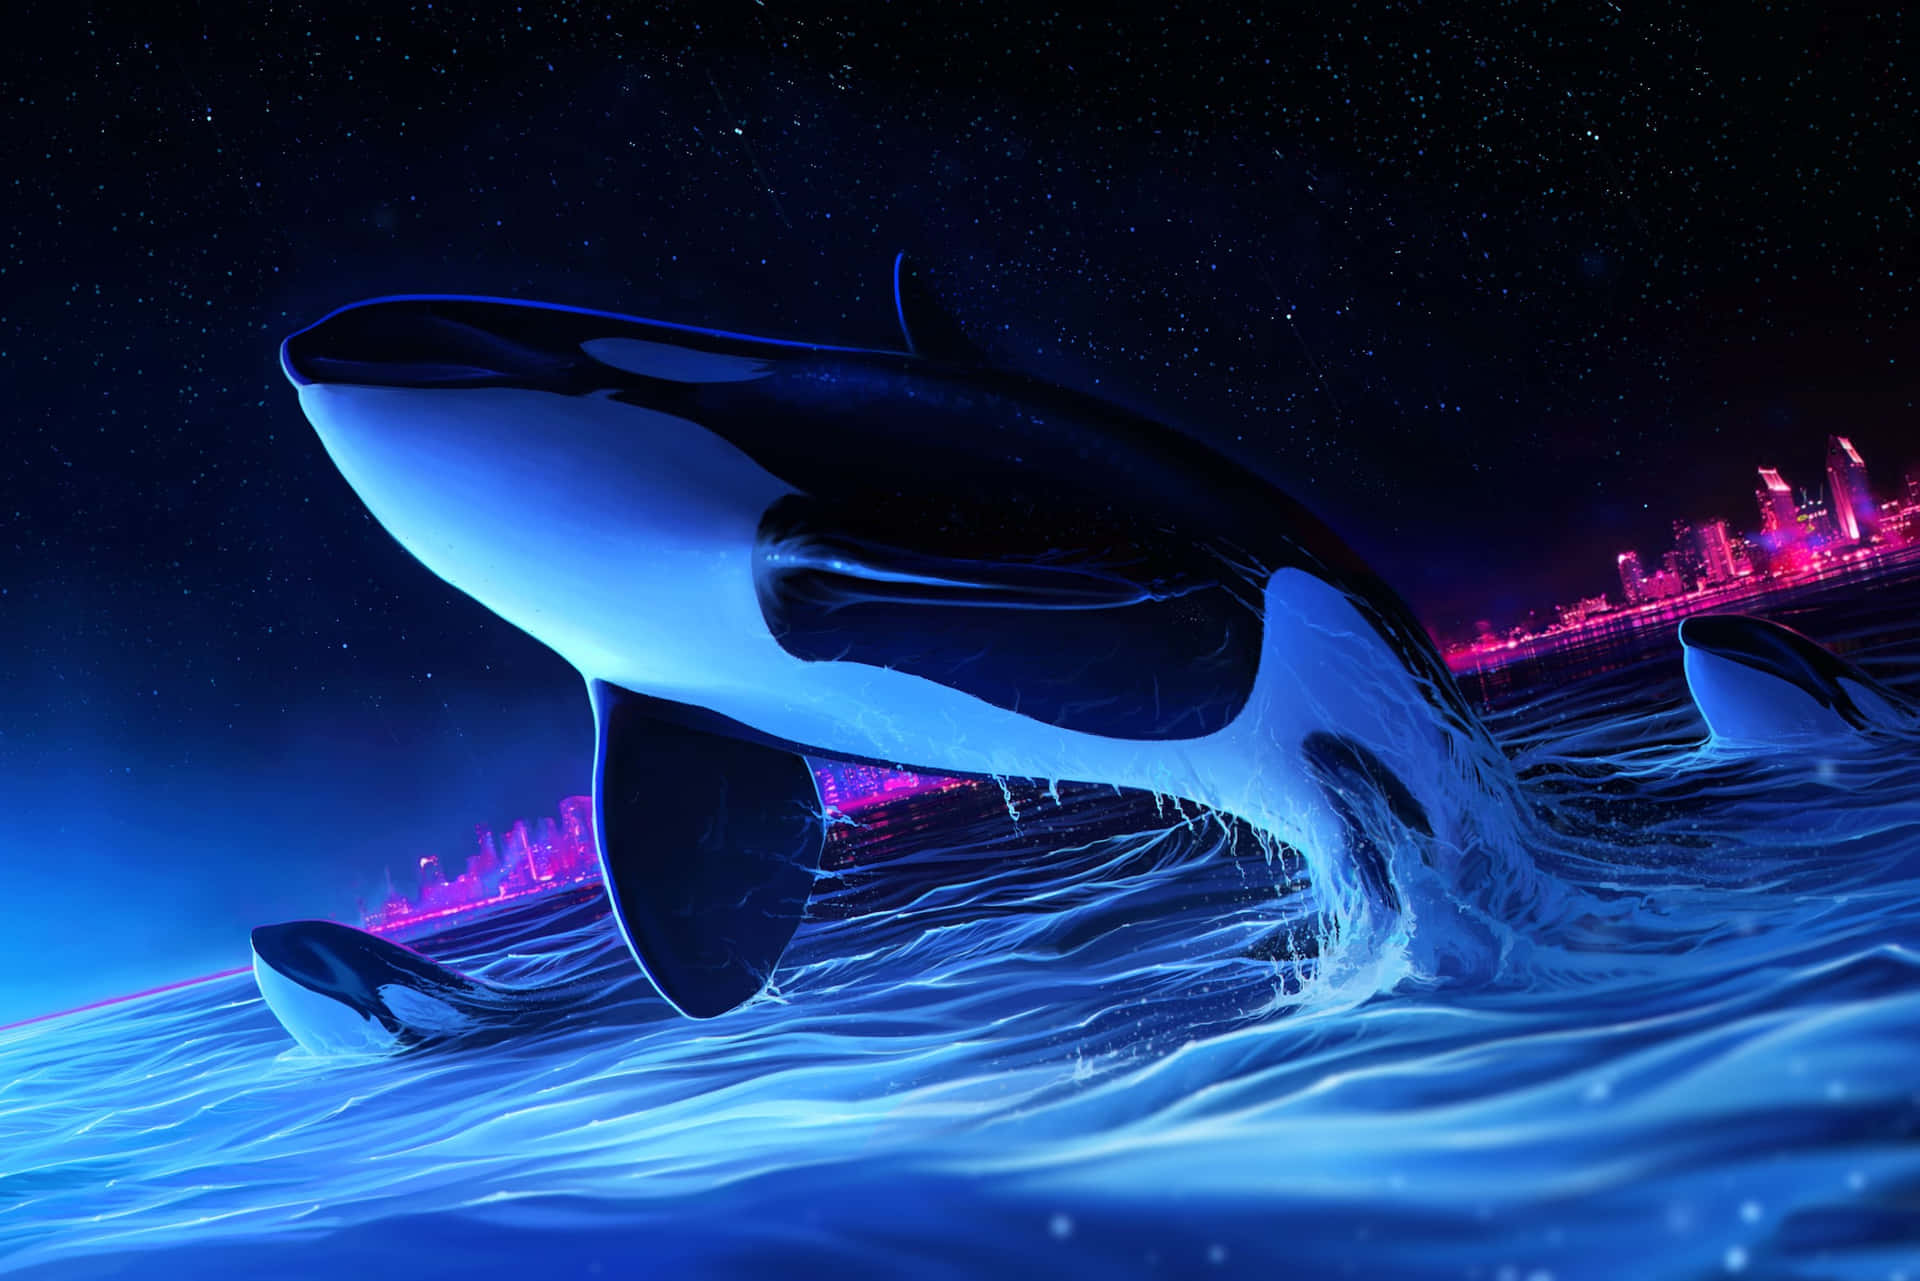 Killer Whale In City Digital Art Picture